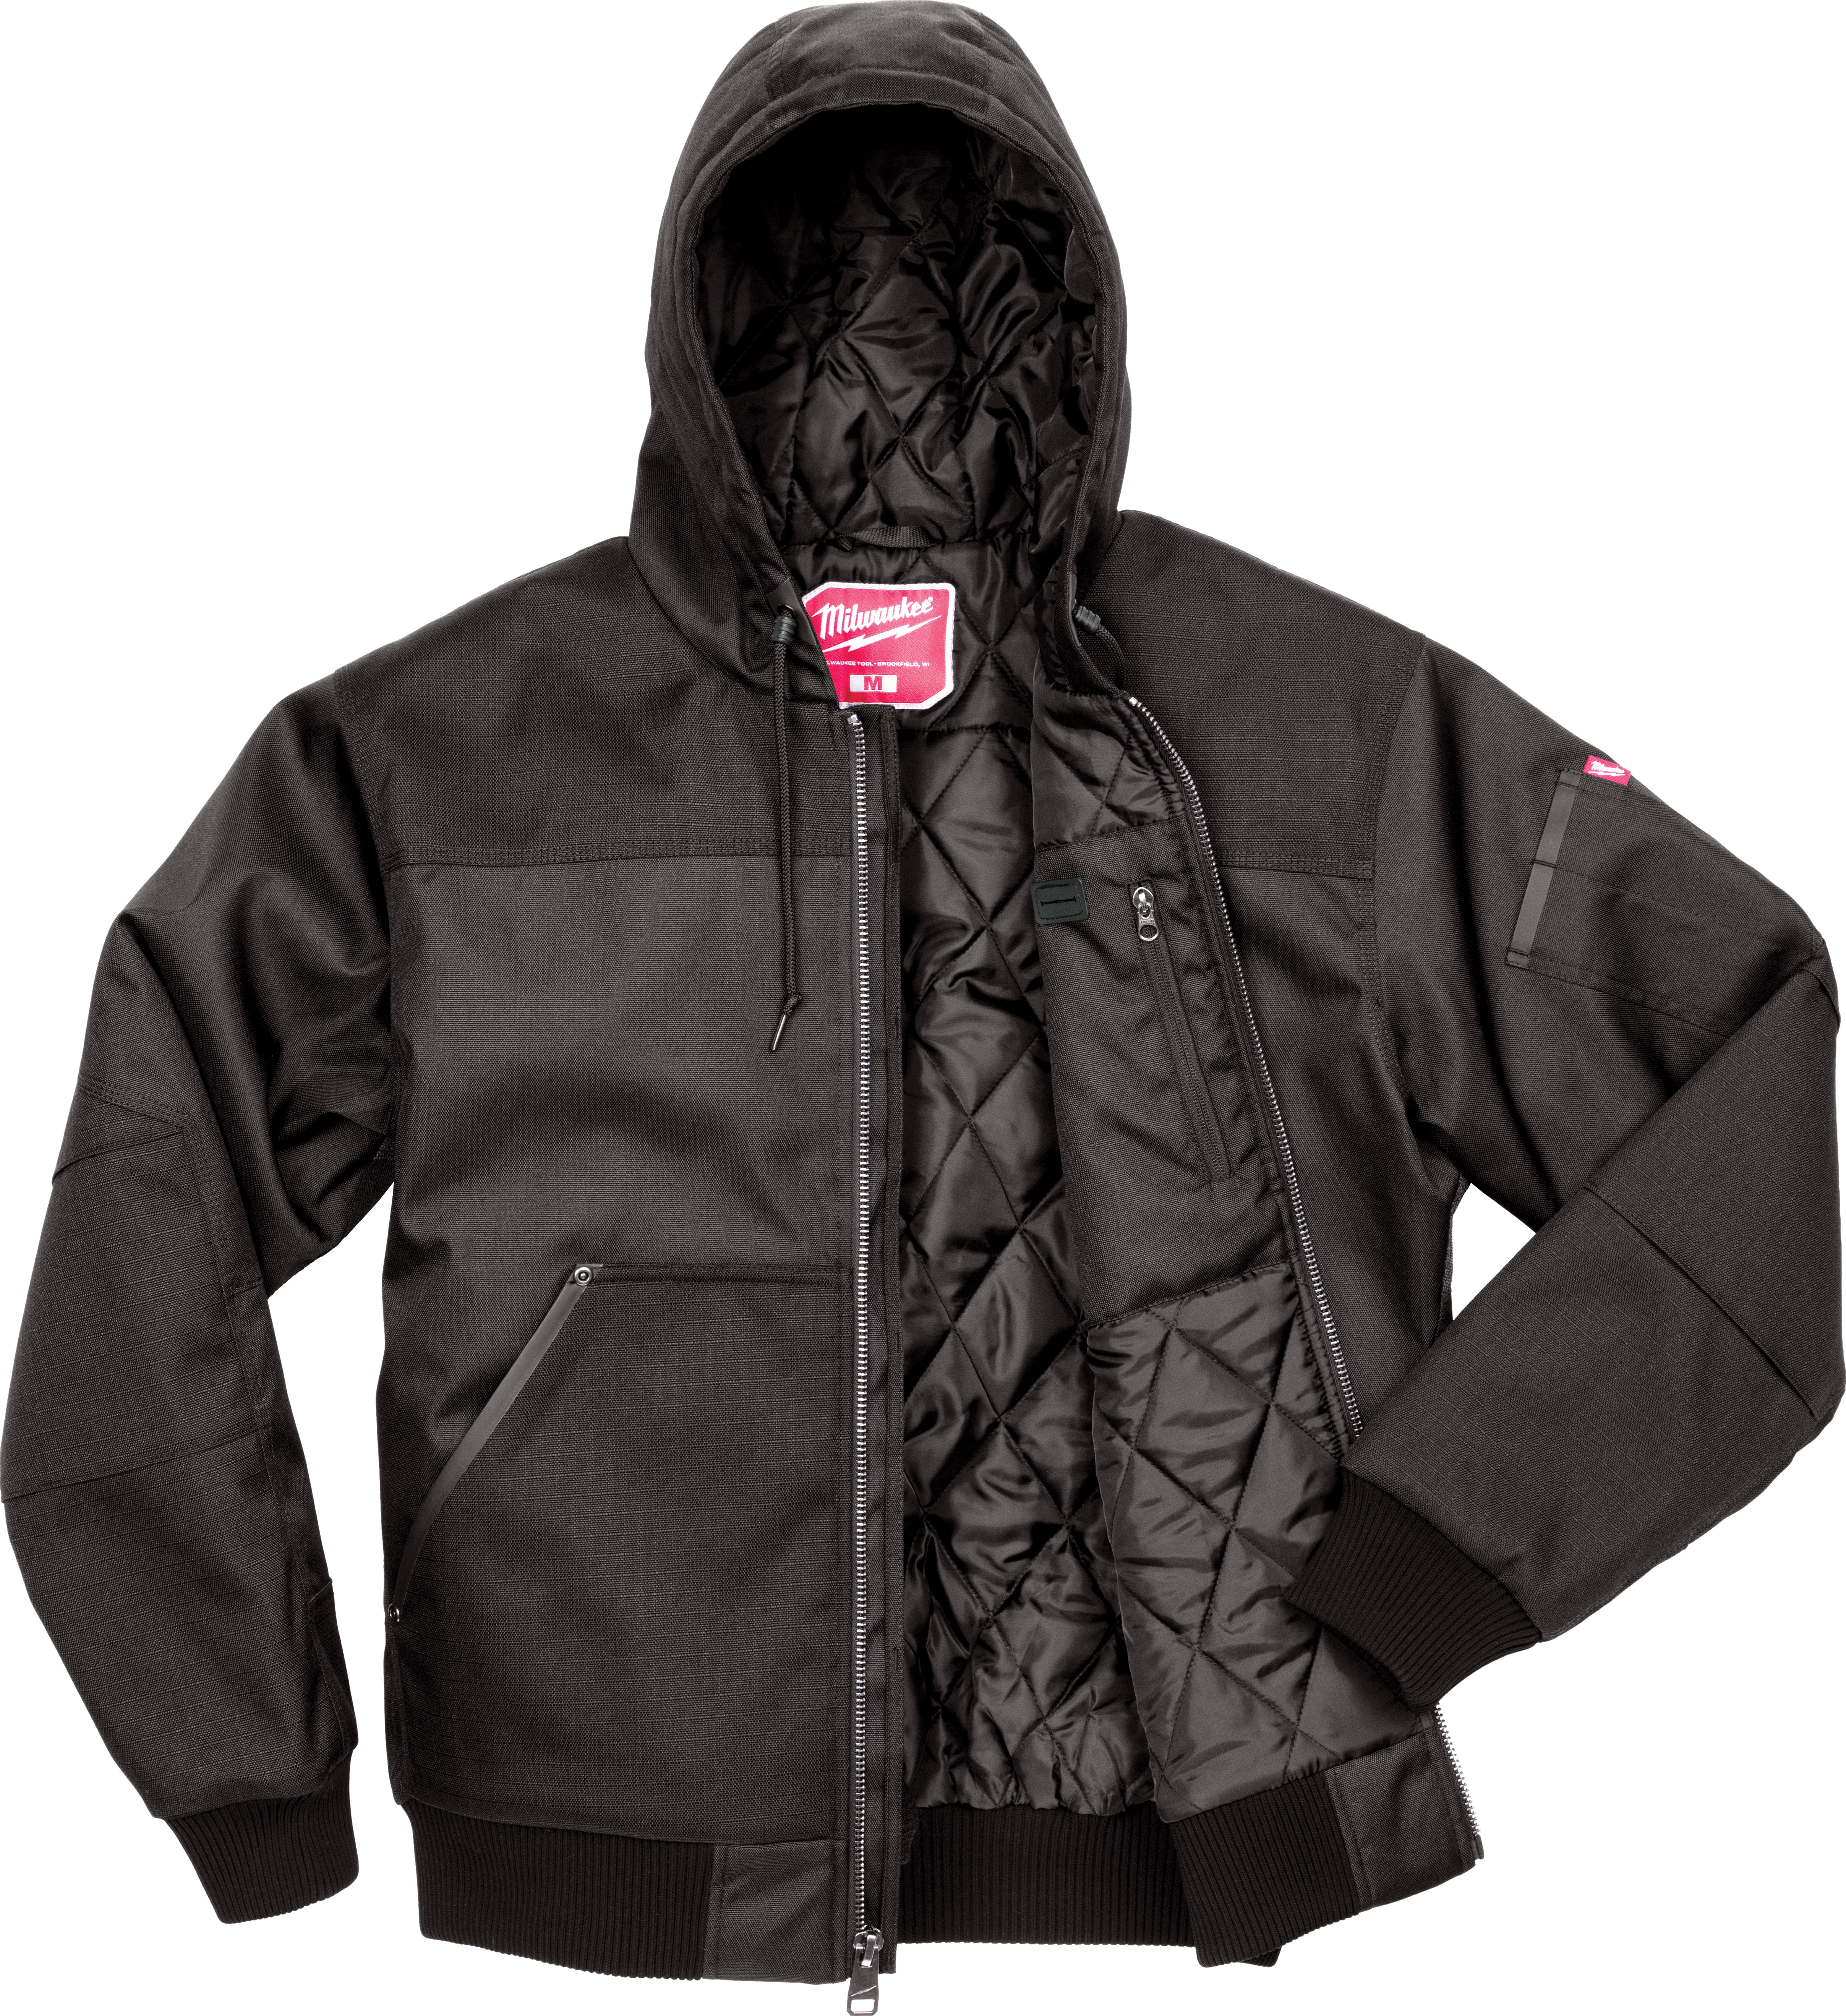 Engineered to battle the jobsite and survive the elements, Milwaukee’s Hooded Jacket is built for tradesman who can’t let cold slow them down. Focused on providing reinforcement in areas where traditional workwear fails, GridIron™ 900 Denier Ripstop...